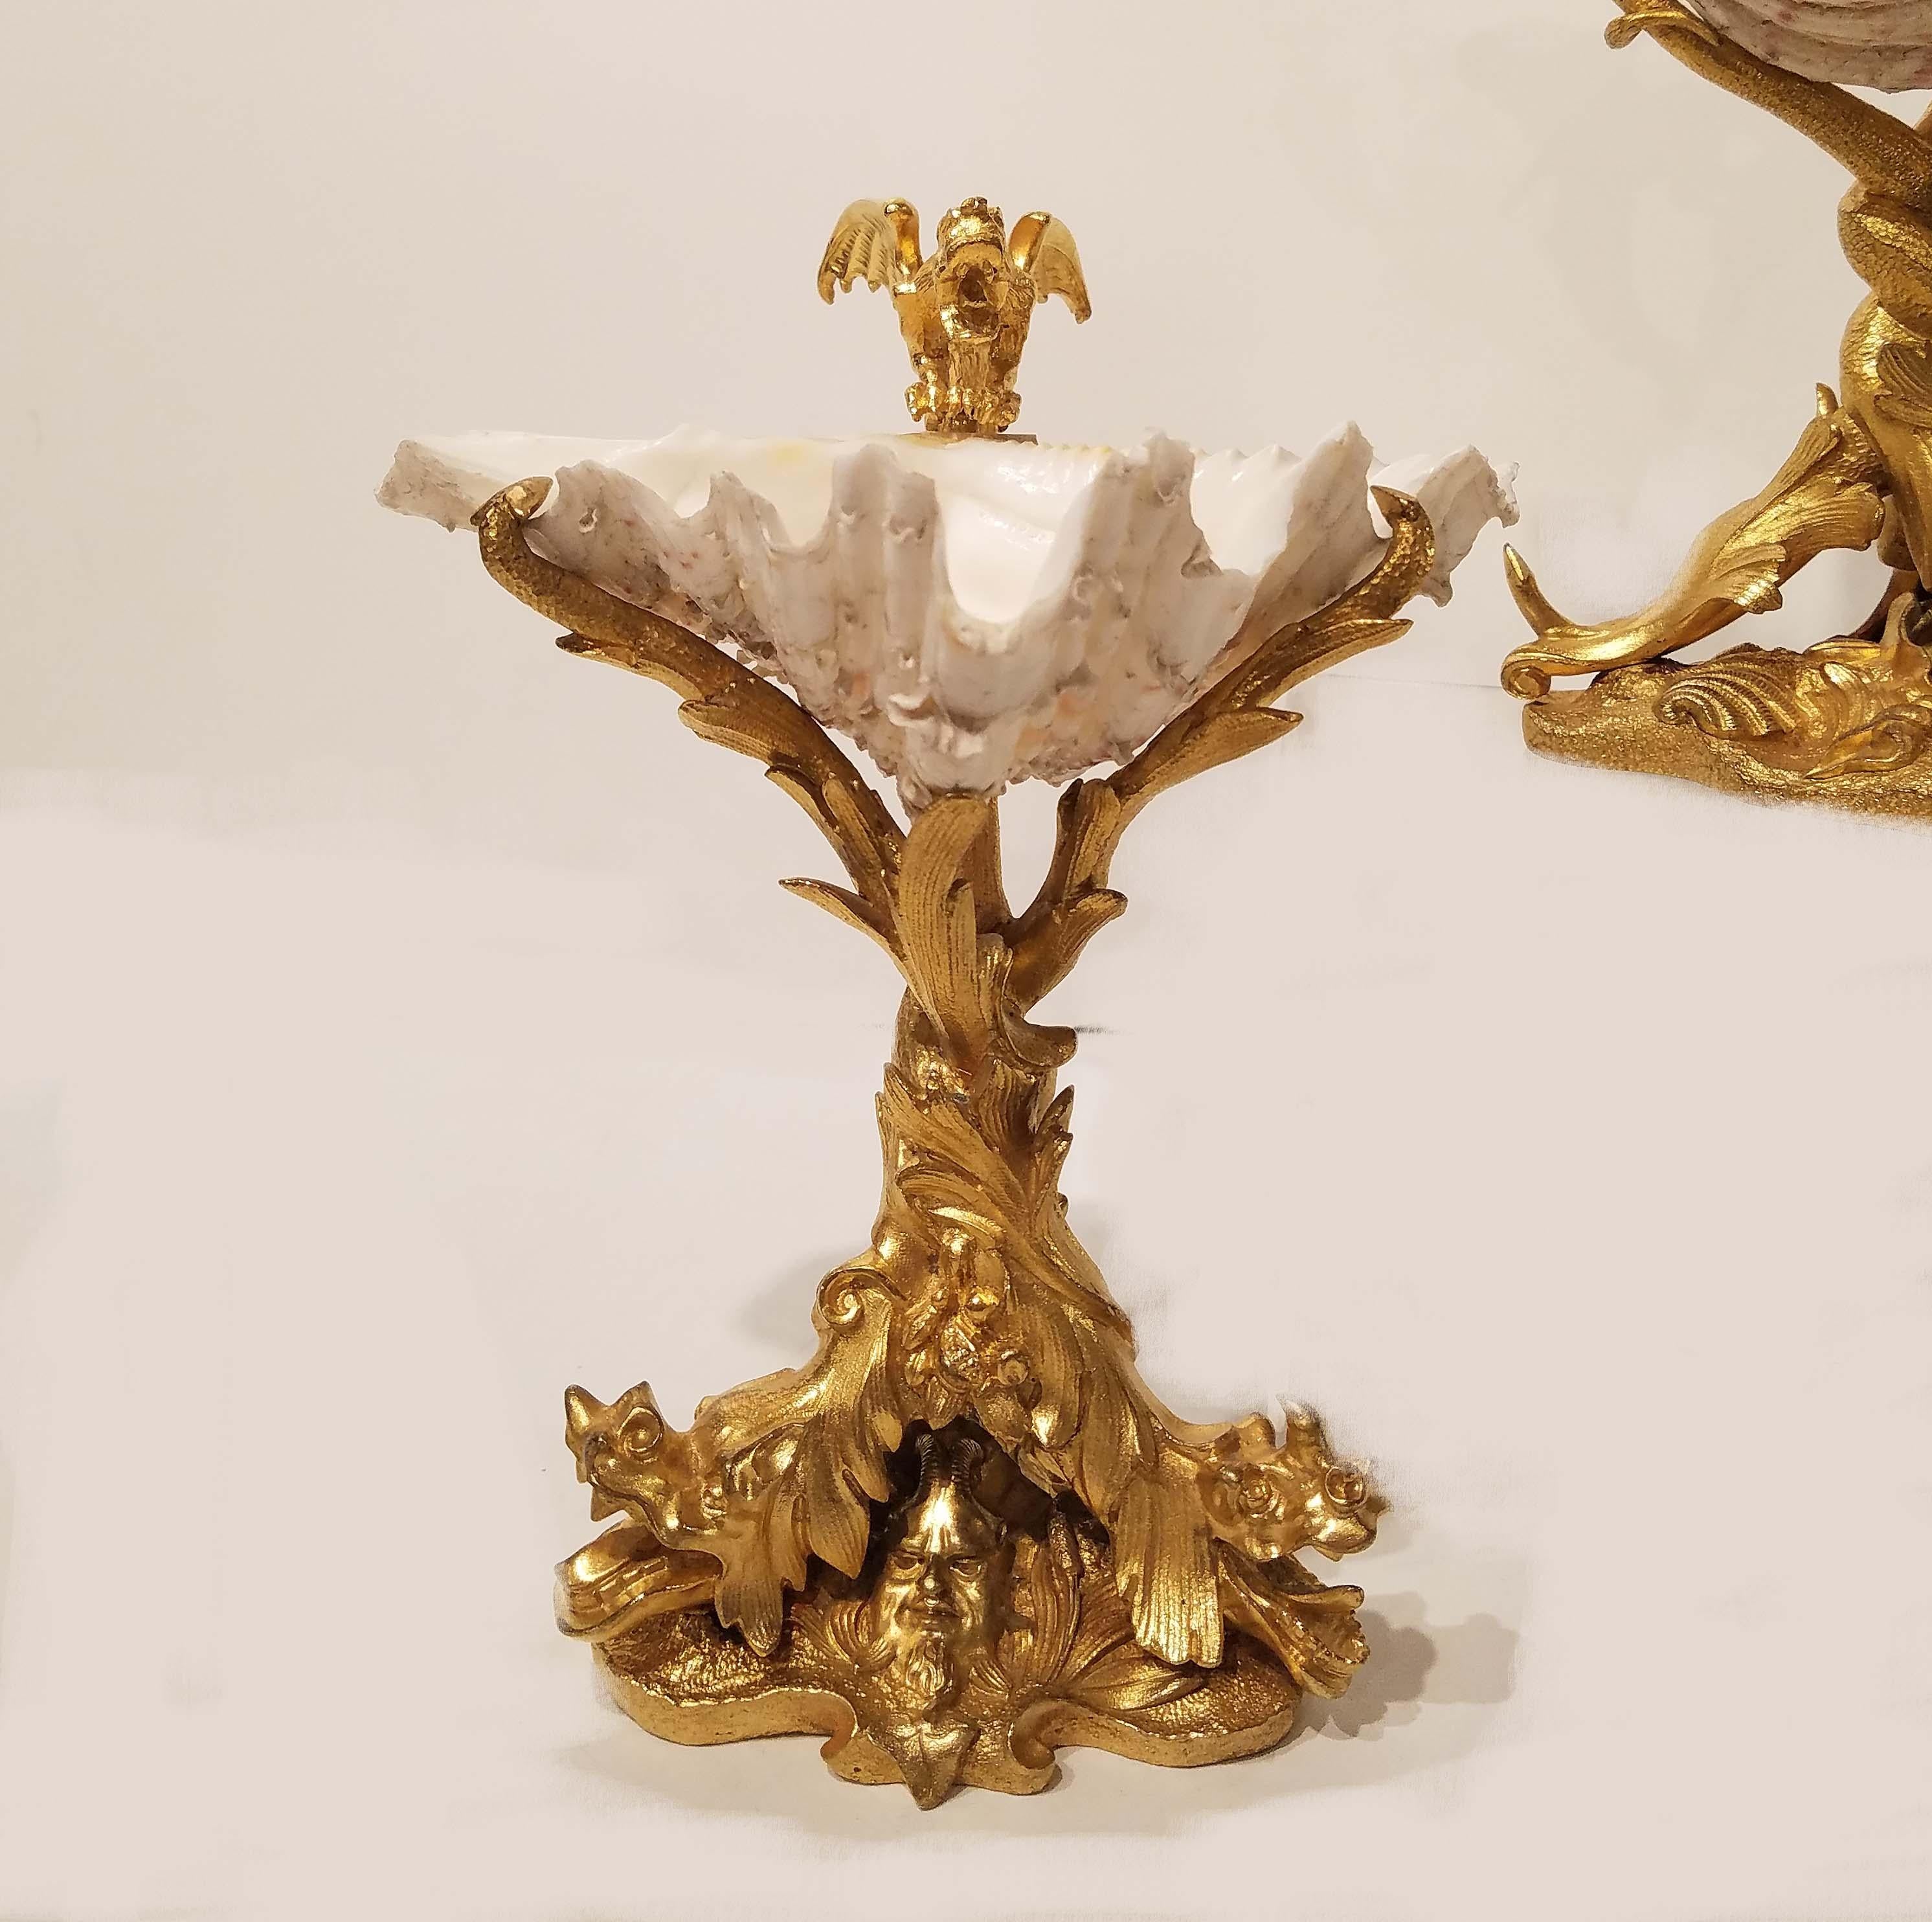 A beautiful pair of gilt bronze and shell grotto tazzas French, circa 1890s.
Decorated with sea dragons and sea elements cast in gilt bronze and with natural shells mounted on top.
   